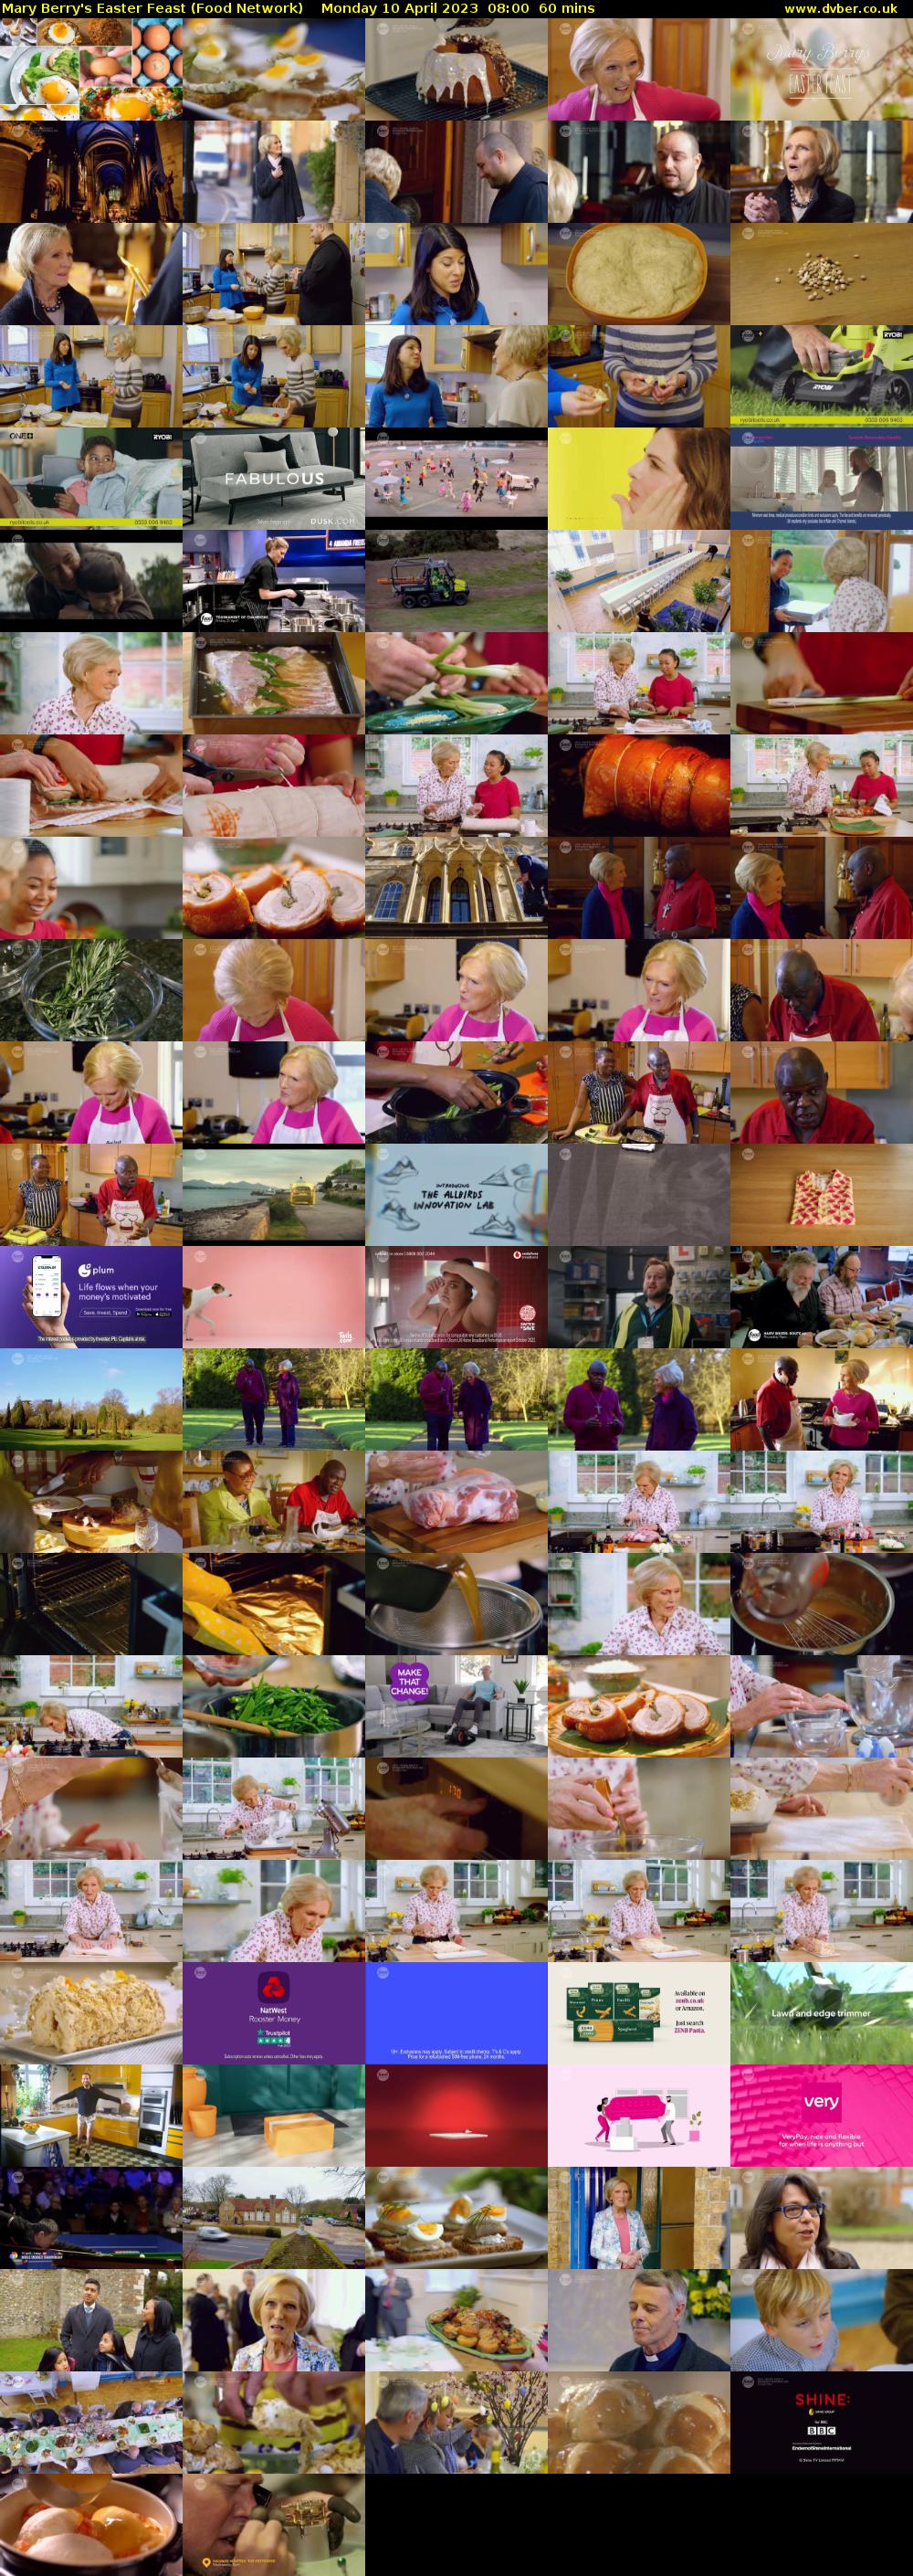 Mary Berry's Easter Feast (Food Network) Monday 10 April 2023 08:00 - 09:00